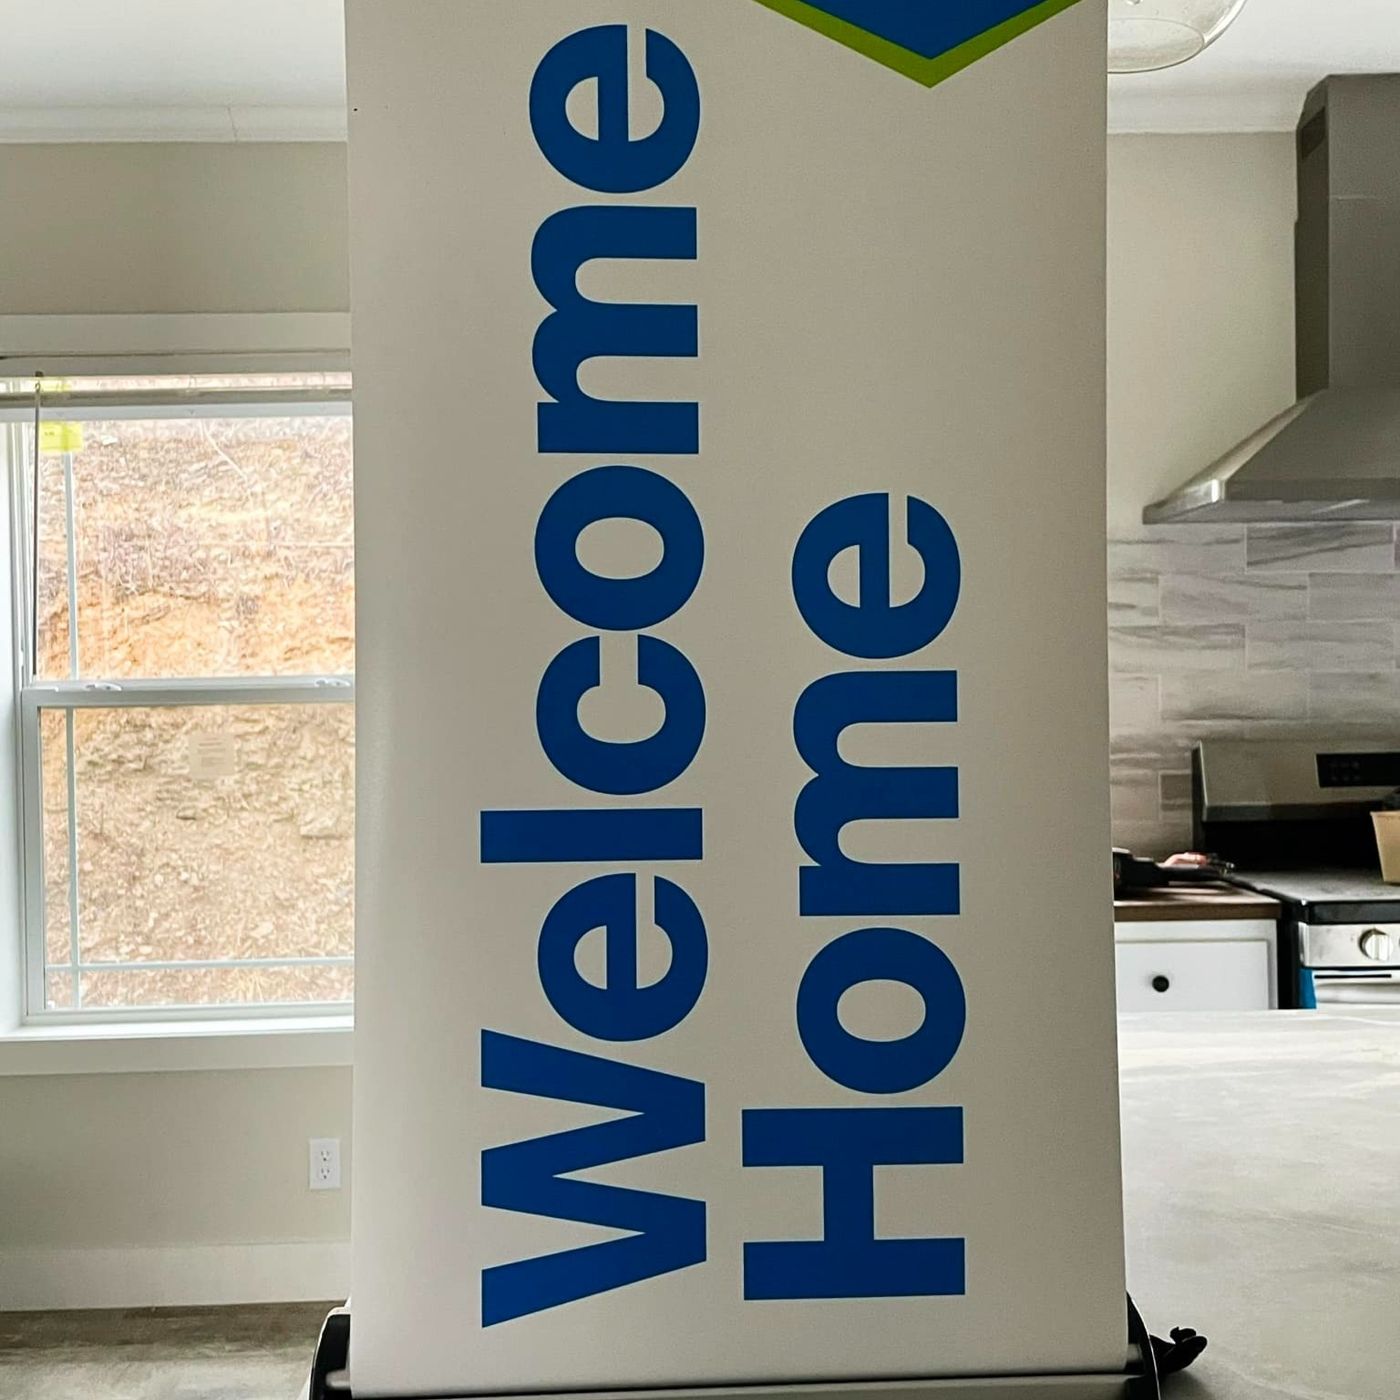 BRYAN C. welcome home image